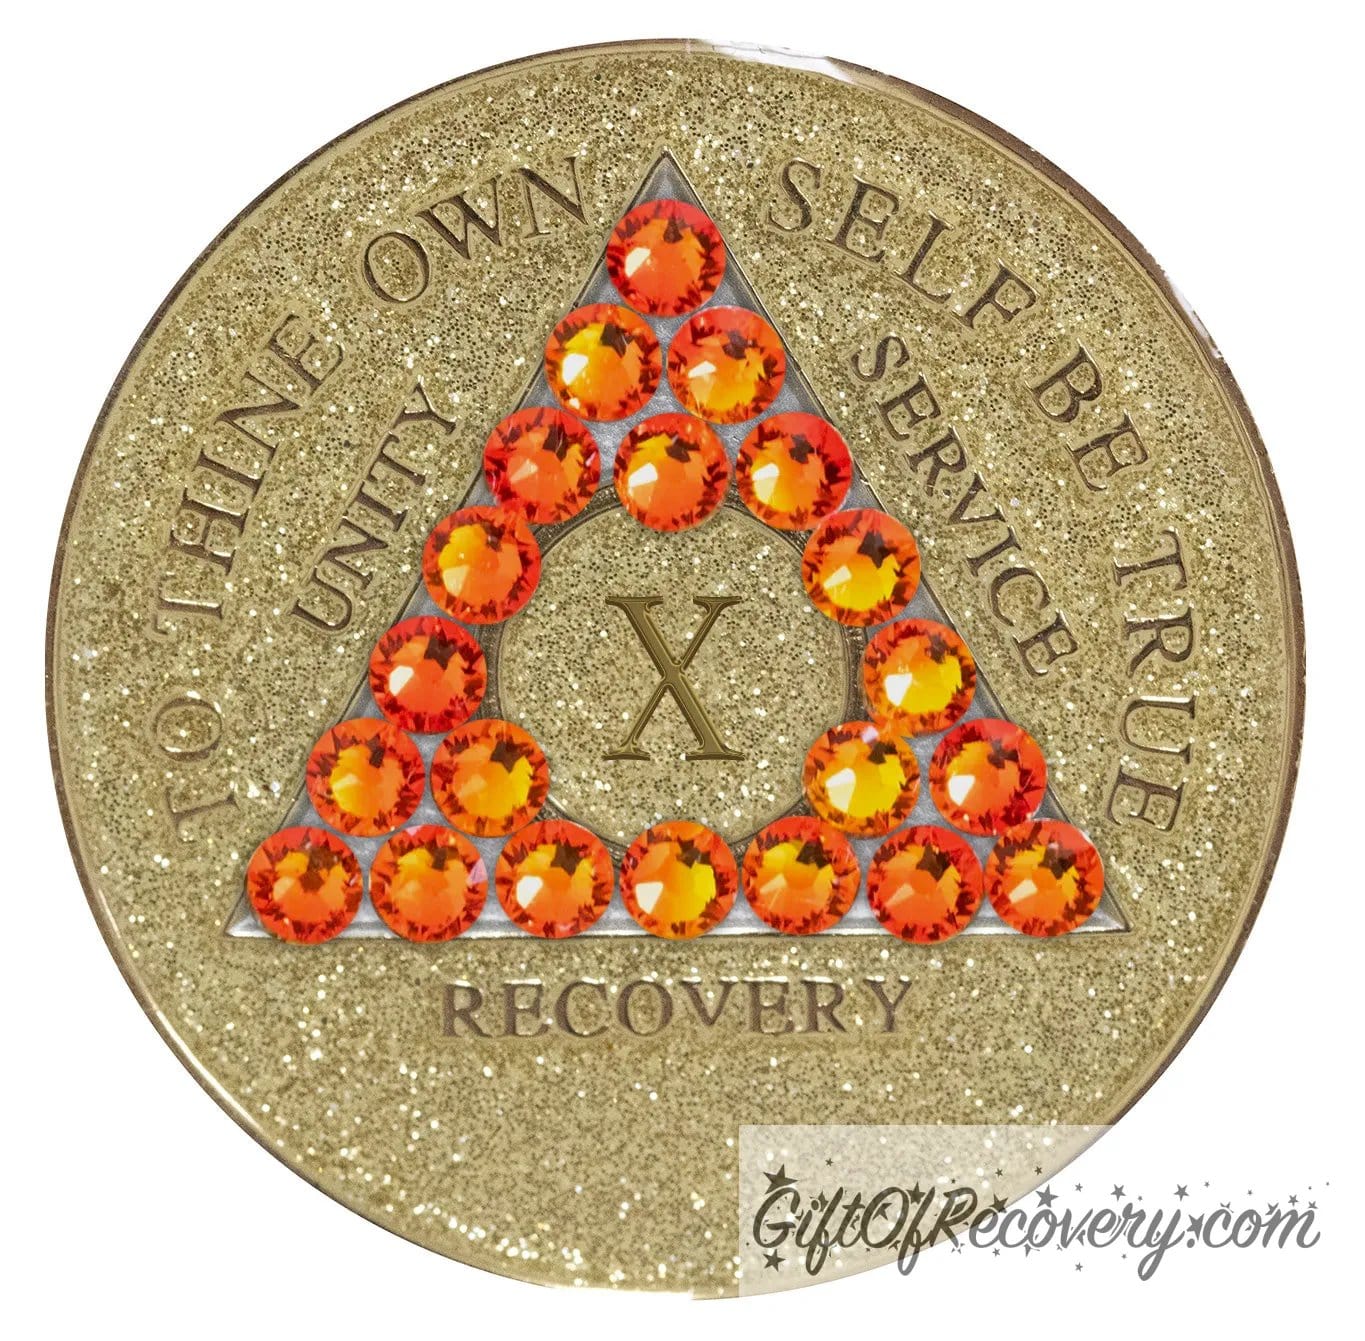 10 year Gold glitter AA medallion with twenty-one fire opal genuine crystals in the shape of a triangle, to thine own self be true, unity, service, recovery embossed in 14k gold-plated brass along with the rim of the medallion, sealed in a high-quality, chip and scratch-resistant resin dome giving it a beautiful glossy look that will last.